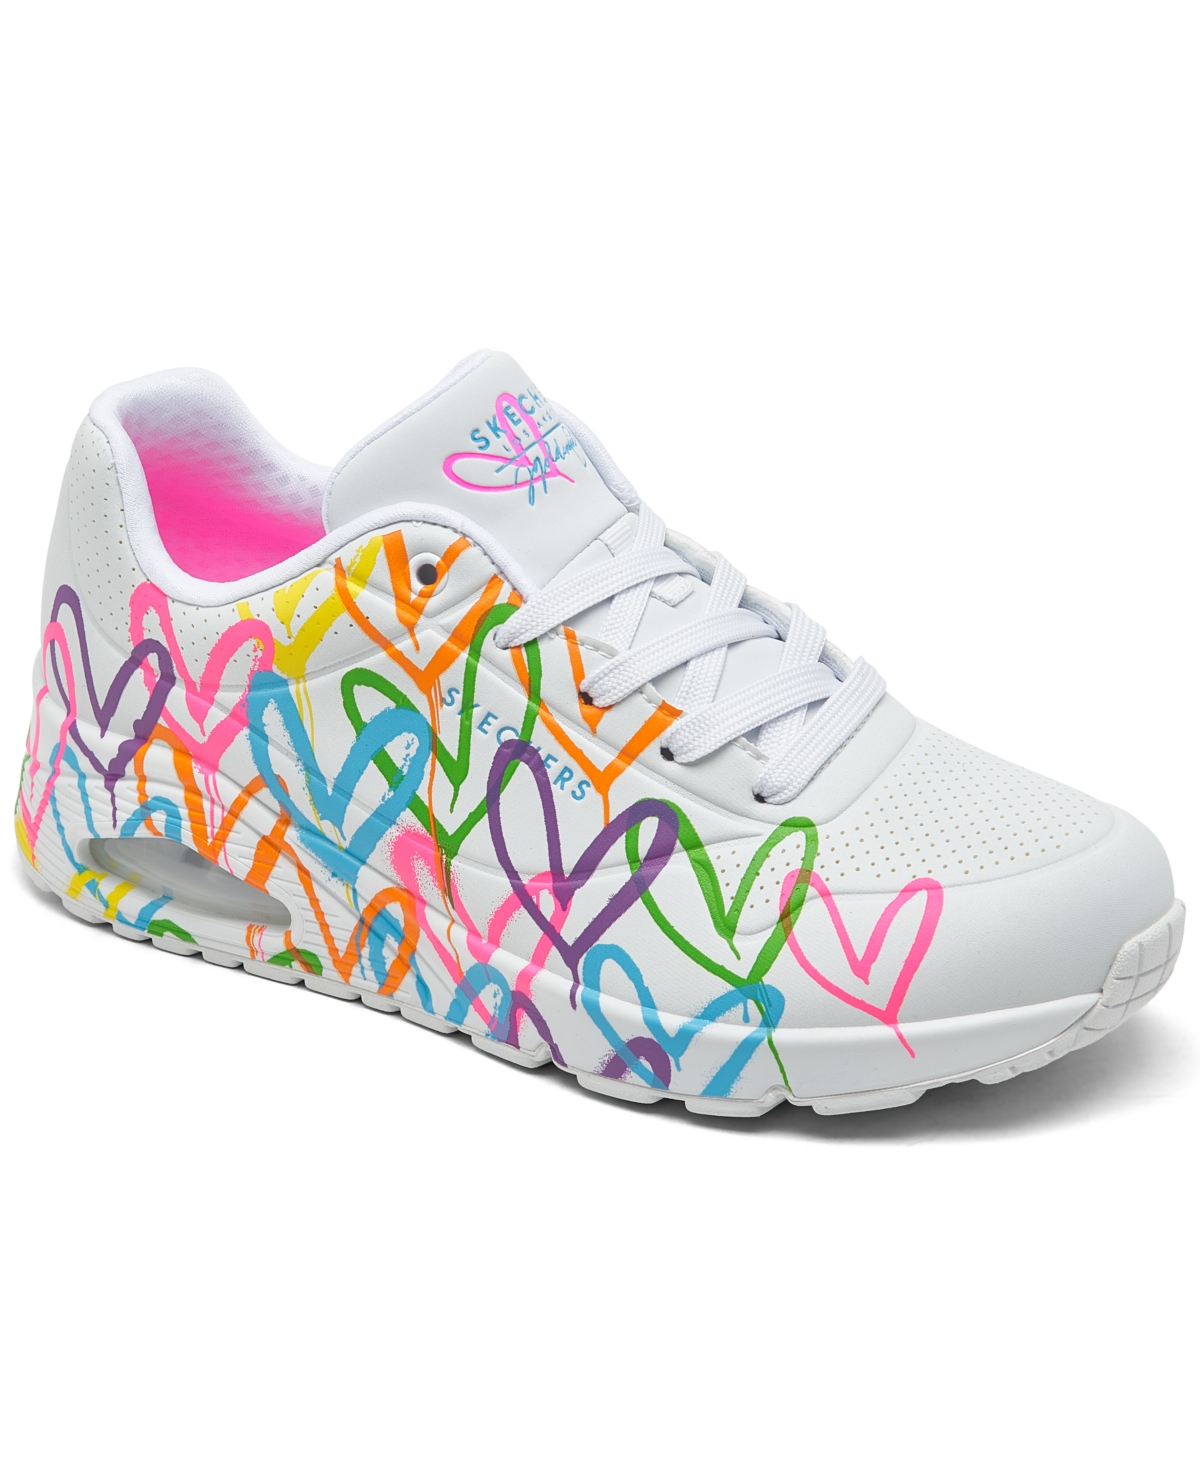 Street Women's Uno - Highlight Love Casual Sneakers from Finish Line - White/multi